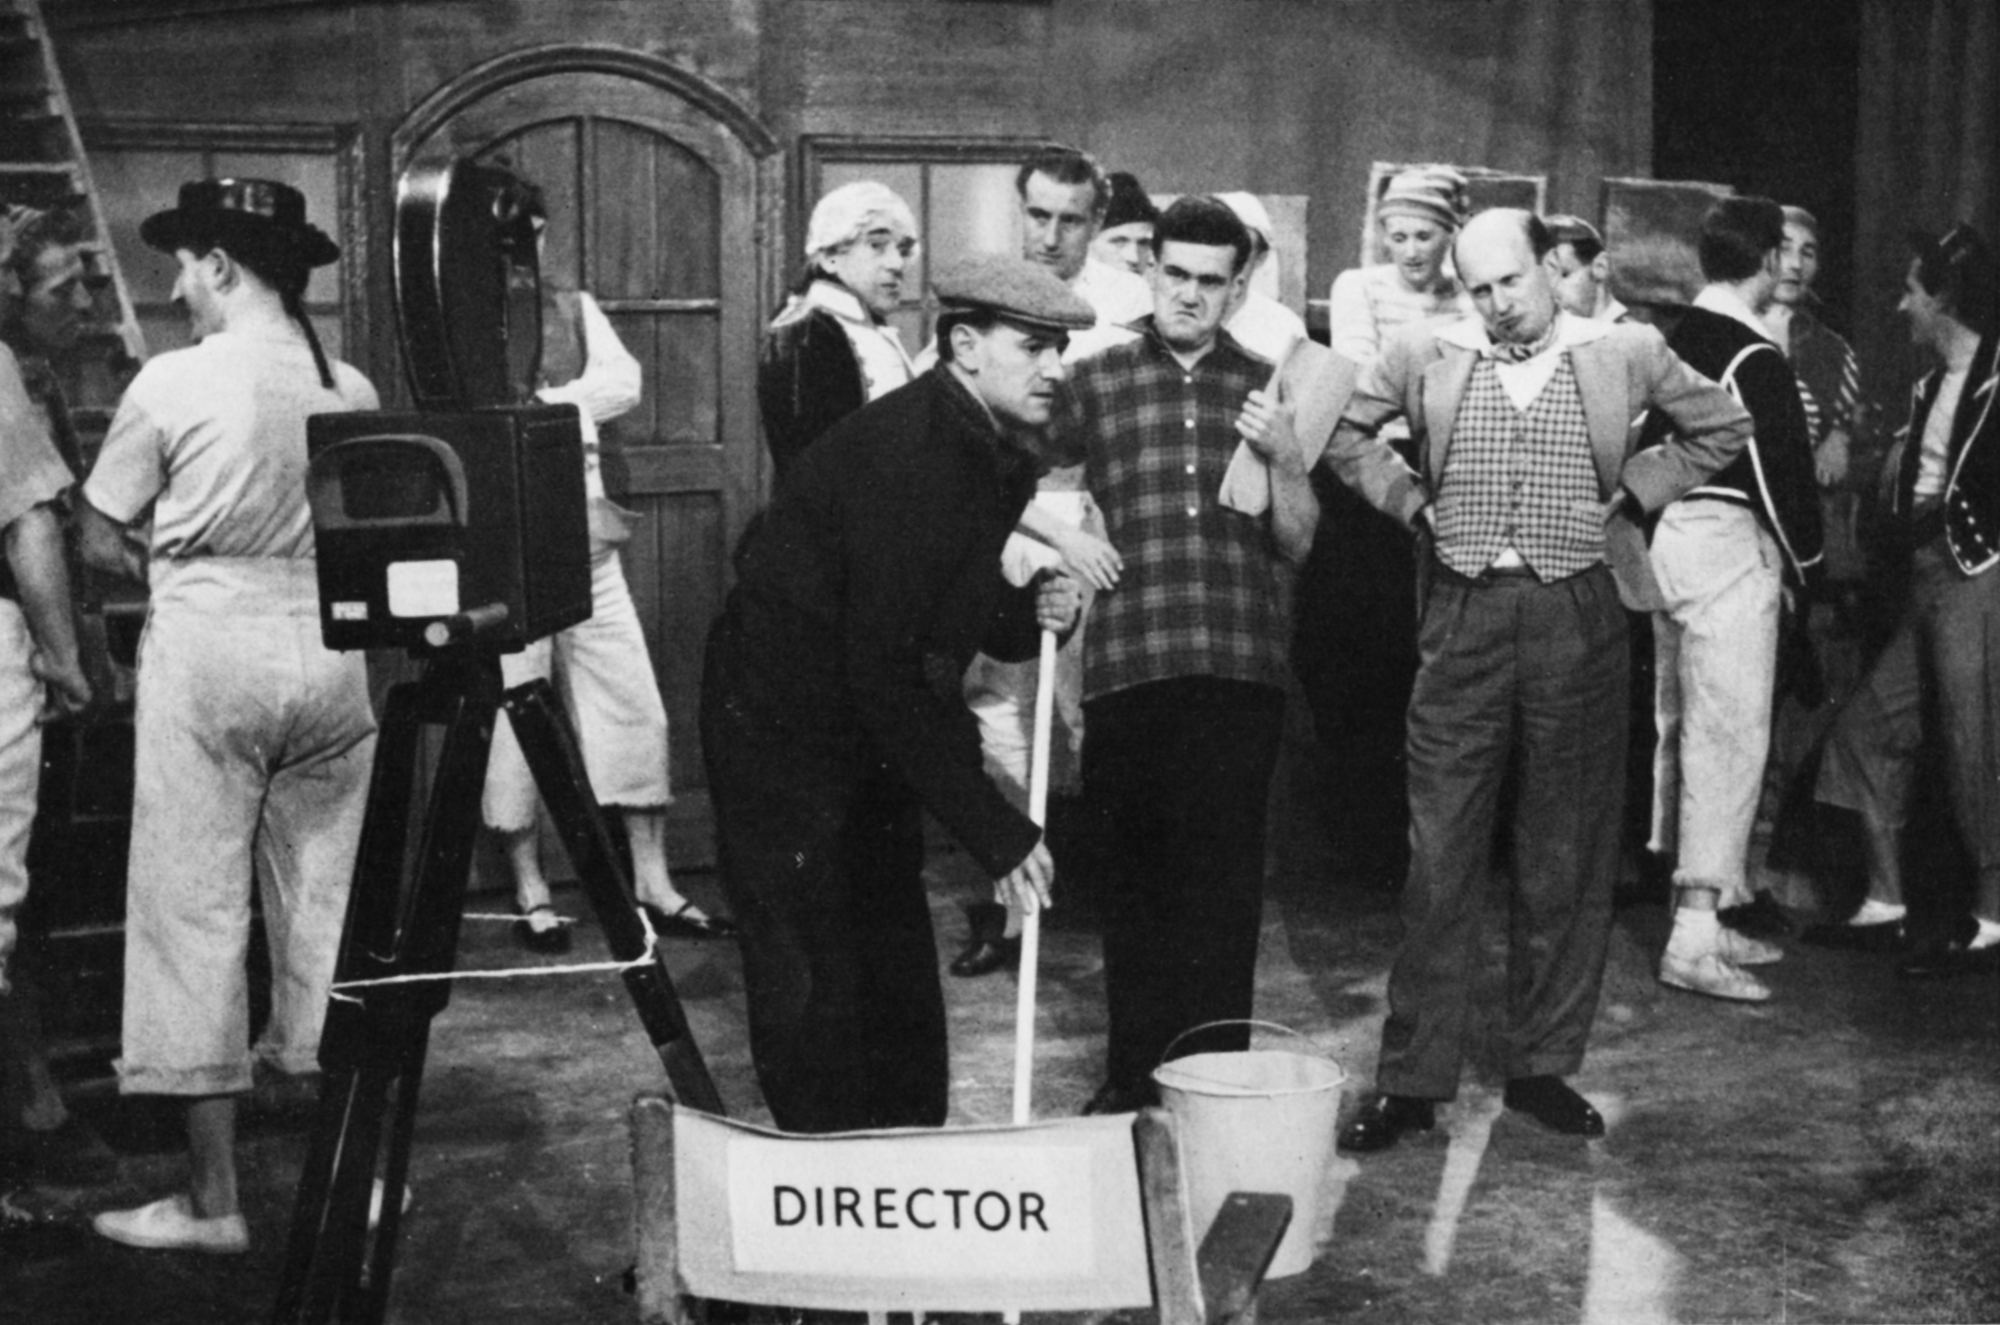 Actor playing actors and stage staff watch a man in a flat cap mop the floor